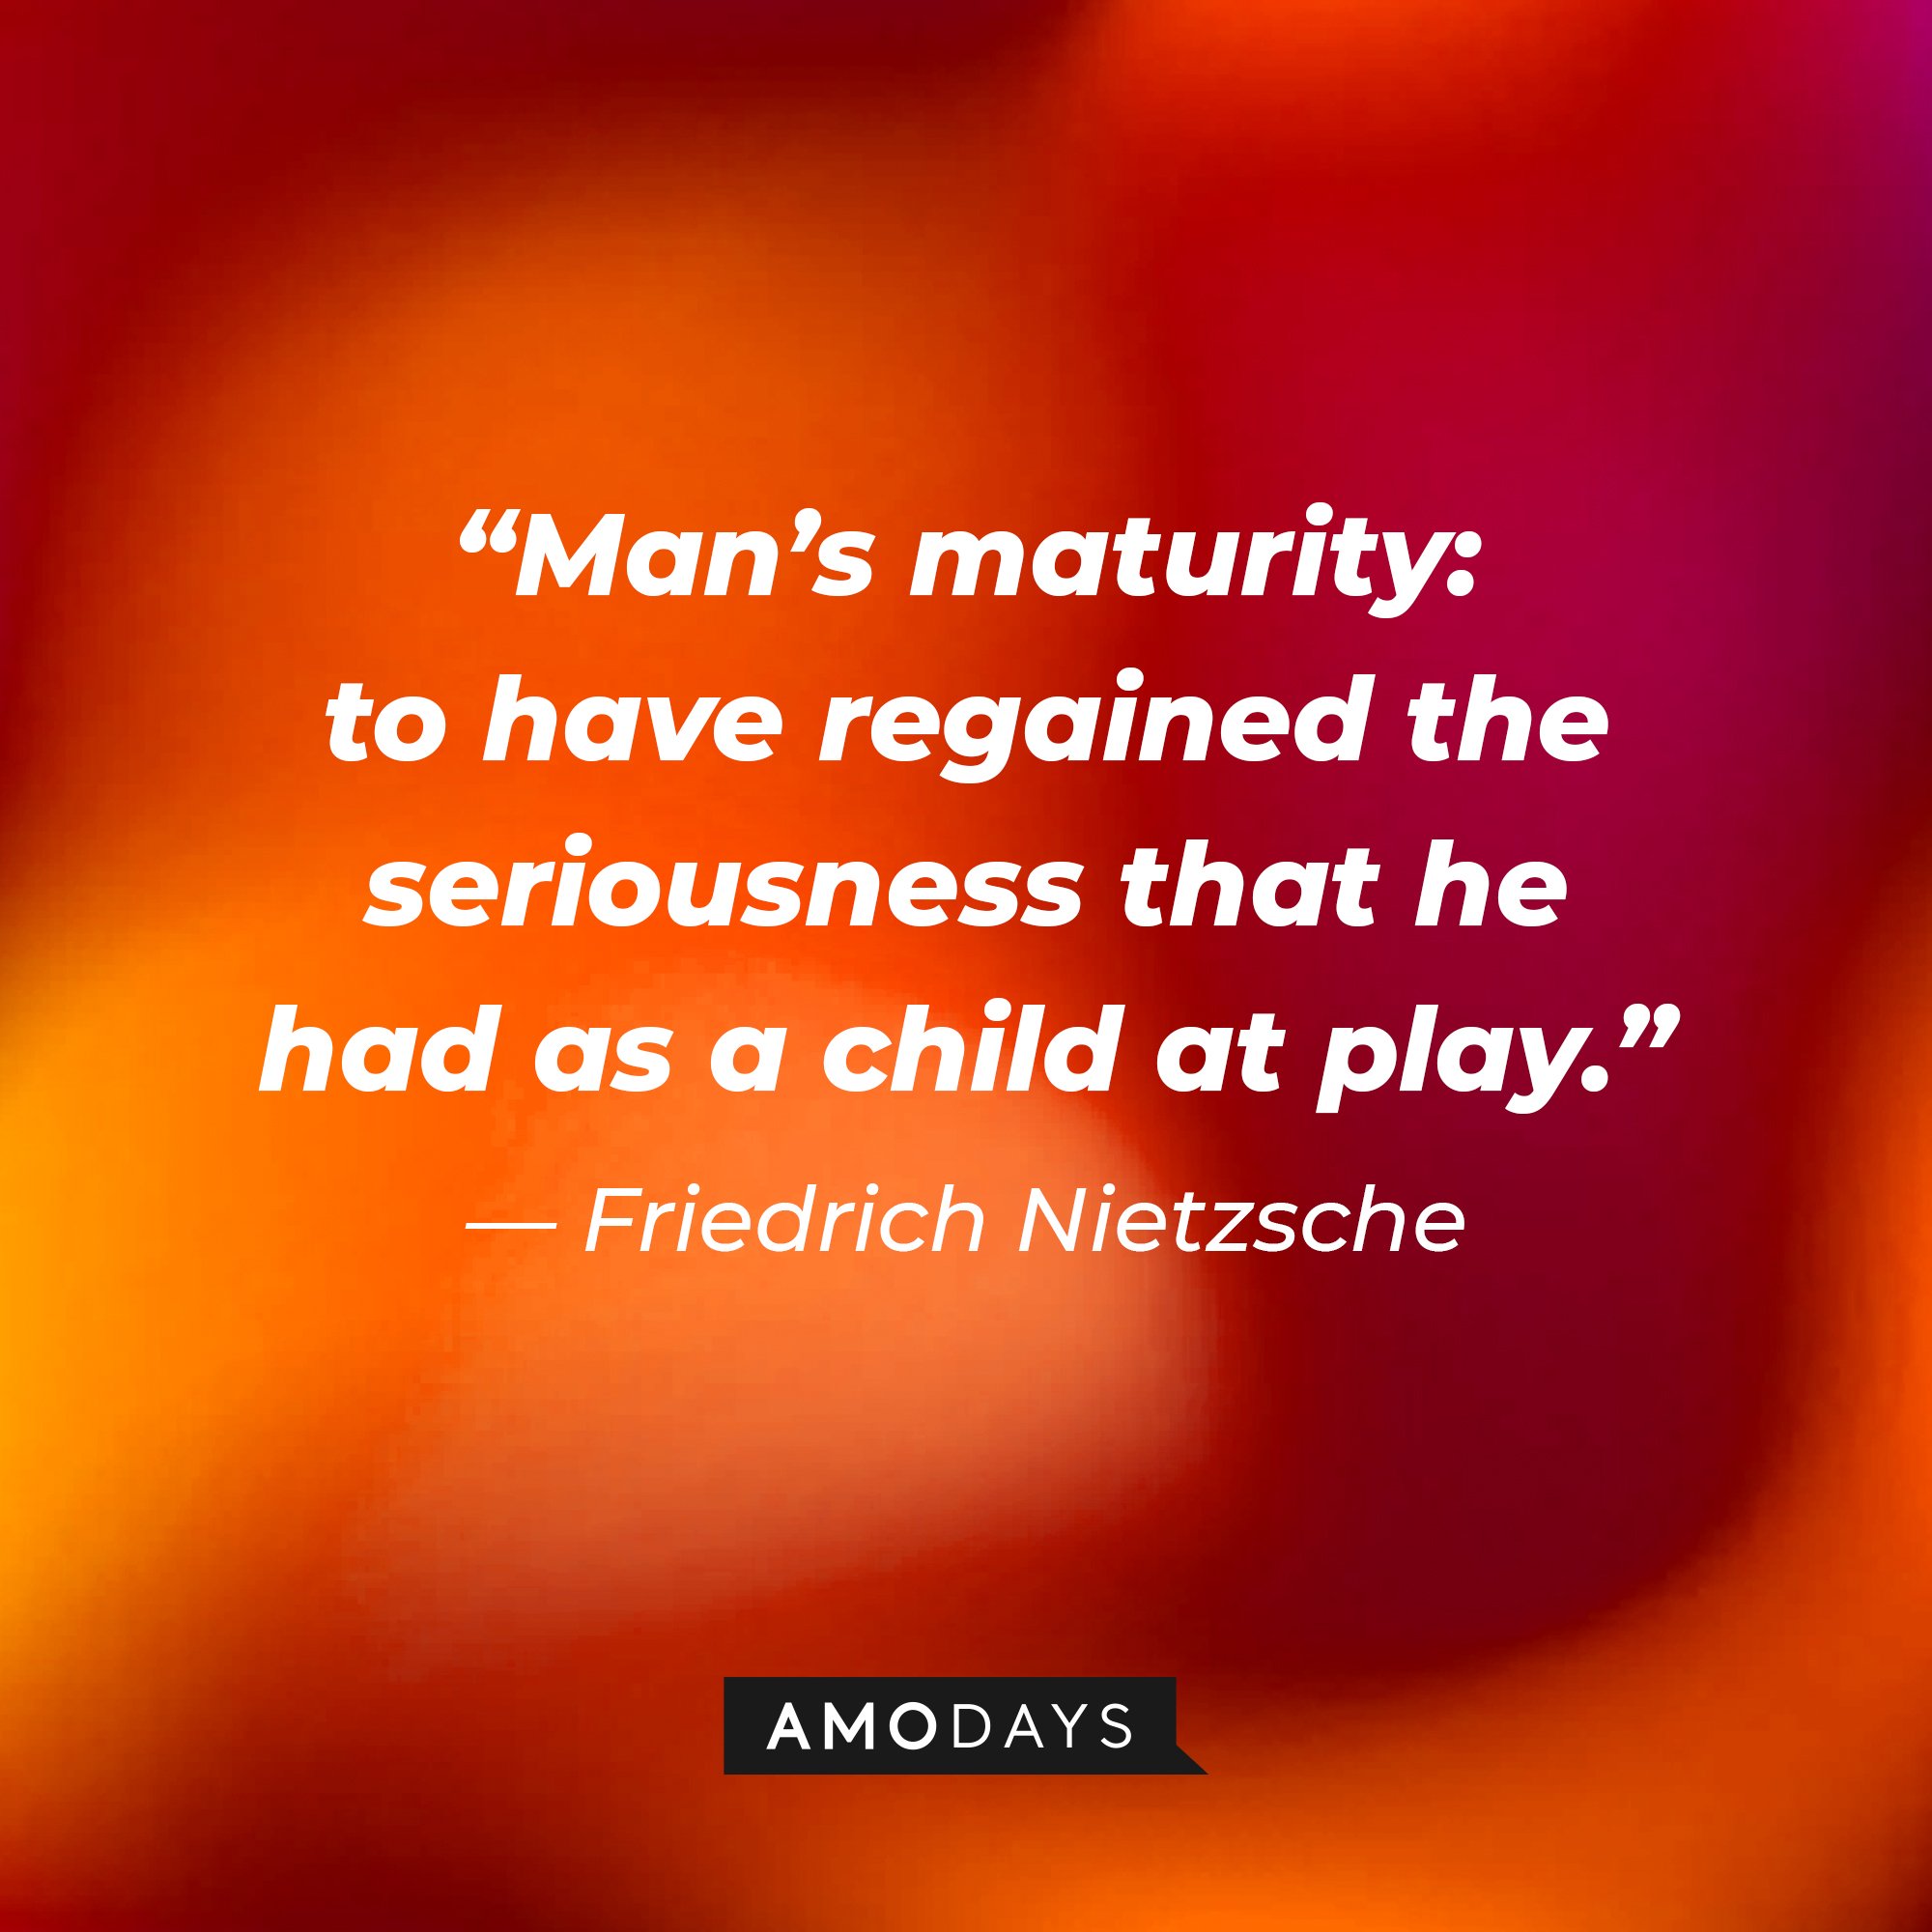 Friedrich Nietzsche's quote: “Man’s maturity: to have regained the seriousness that he had as a child at play.” | Image: AmoDays